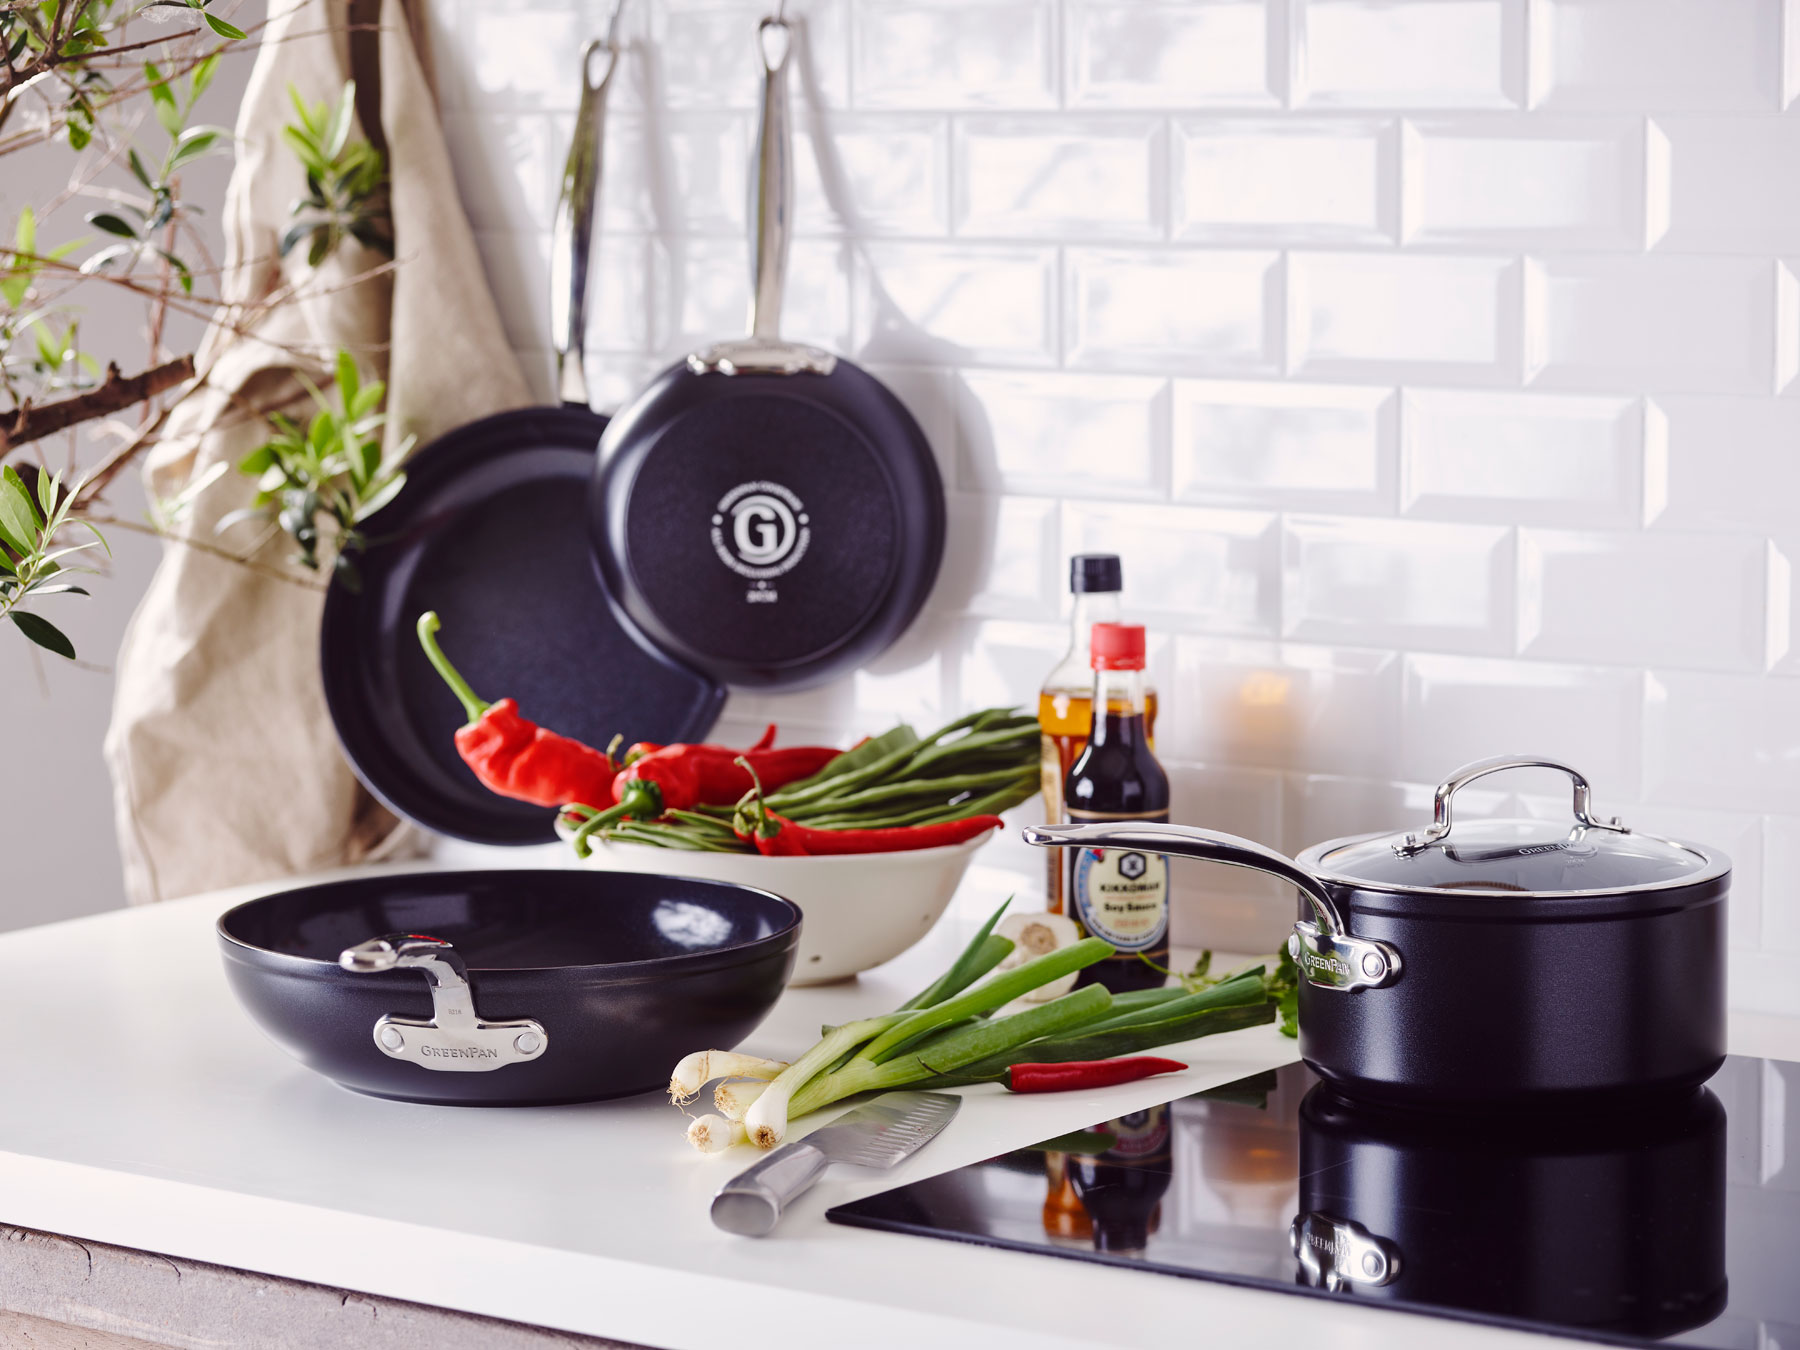 GreenPan's New Barcelona Pro Collection Of Ceramic Non-stick Cookware